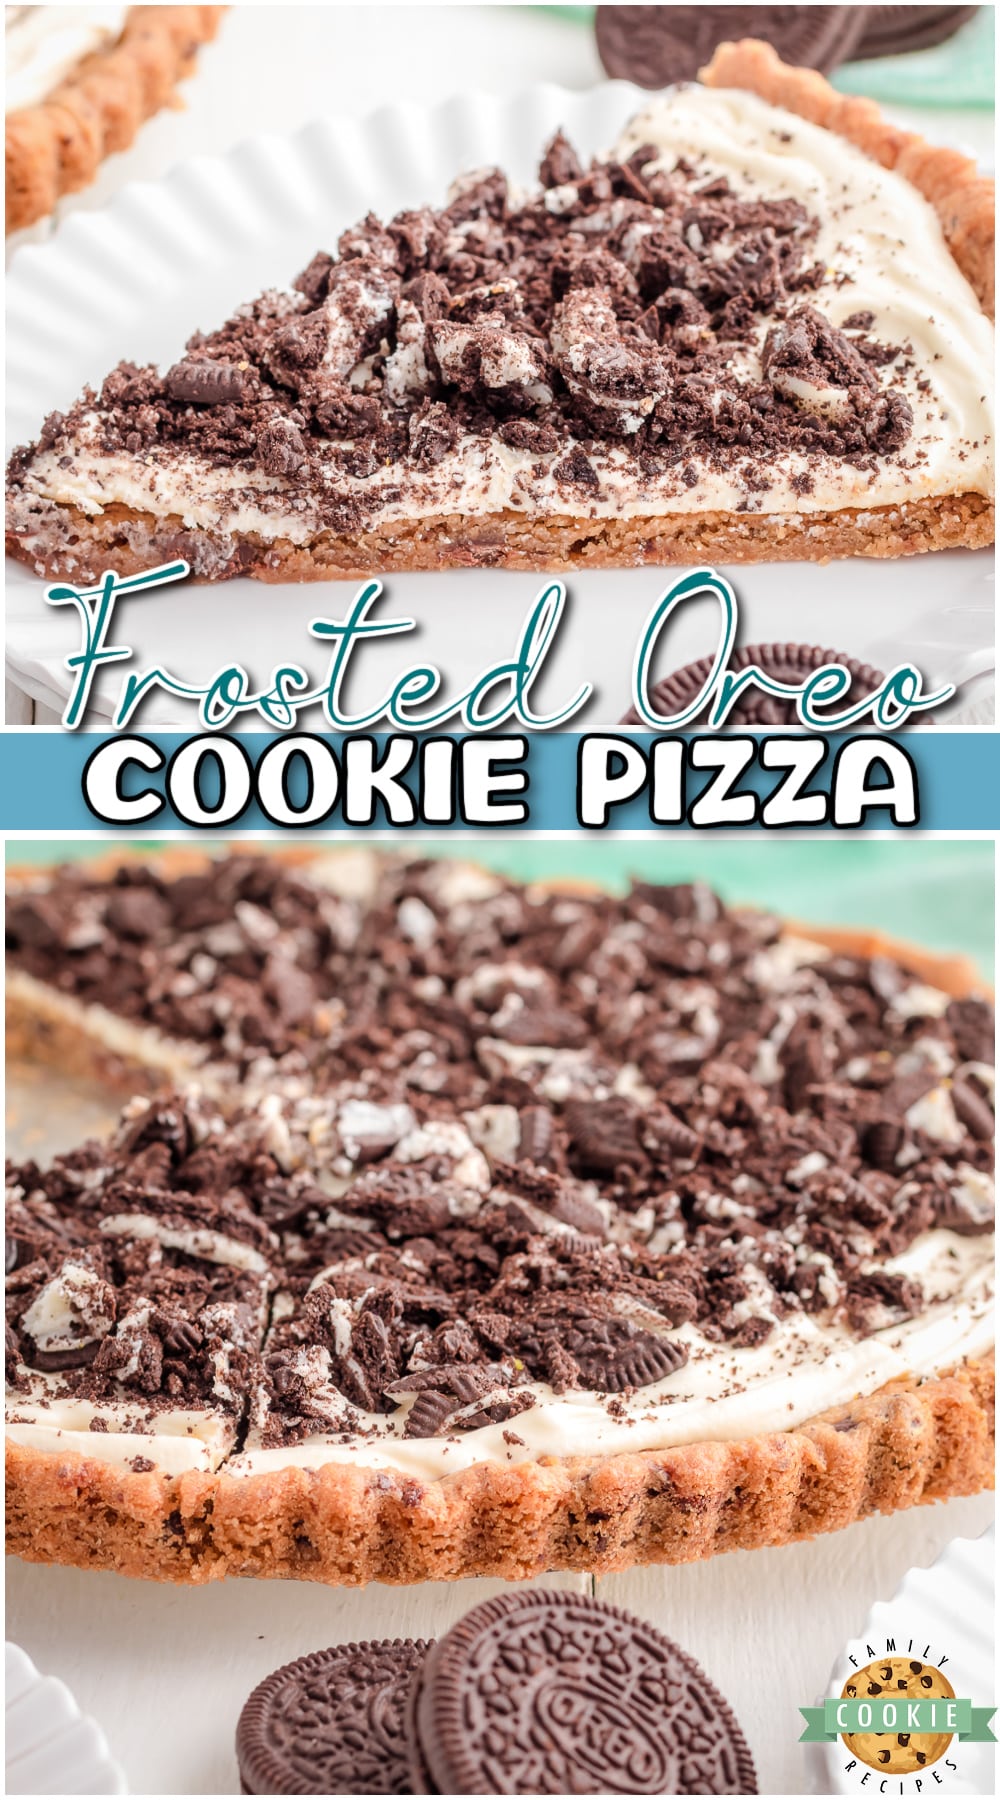 Frosted Oreo Pizza made with chocolate chunk cookie dough, topped with cream cheese frosting & chopped Oreos. Oreo dessert pizza perfect for cookie lovers!